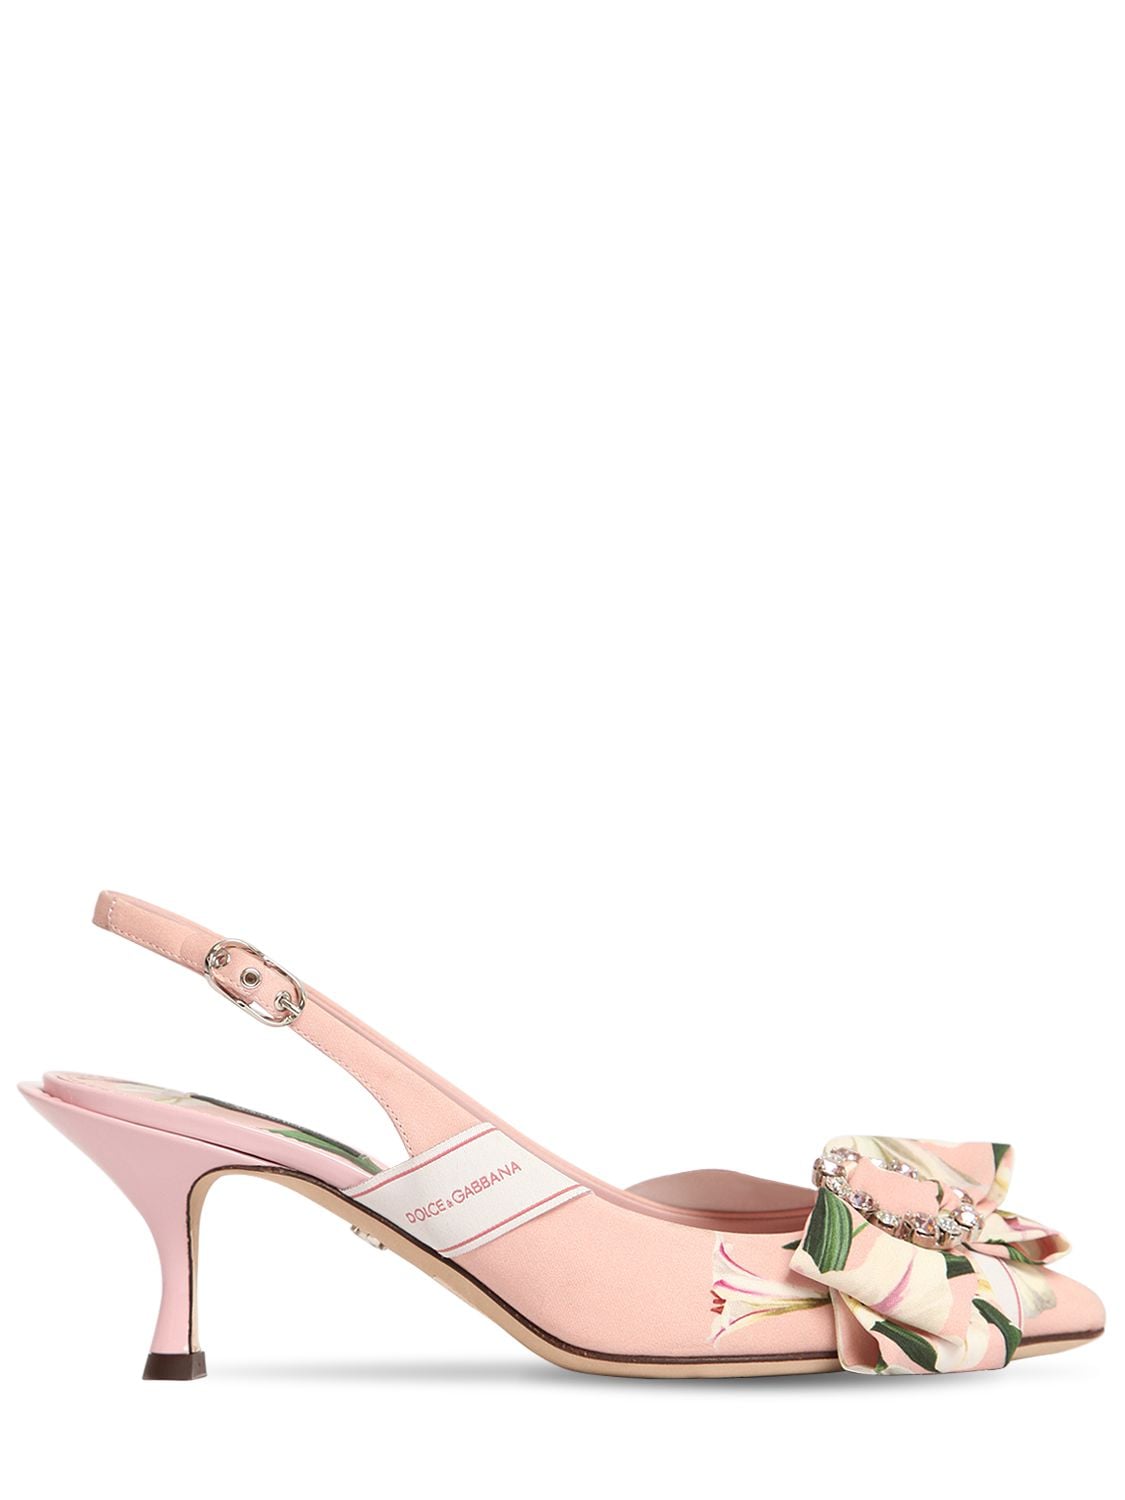 Dolce & Gabbana 60mm Lory Flower Cady Sling Back Sandals In Pink